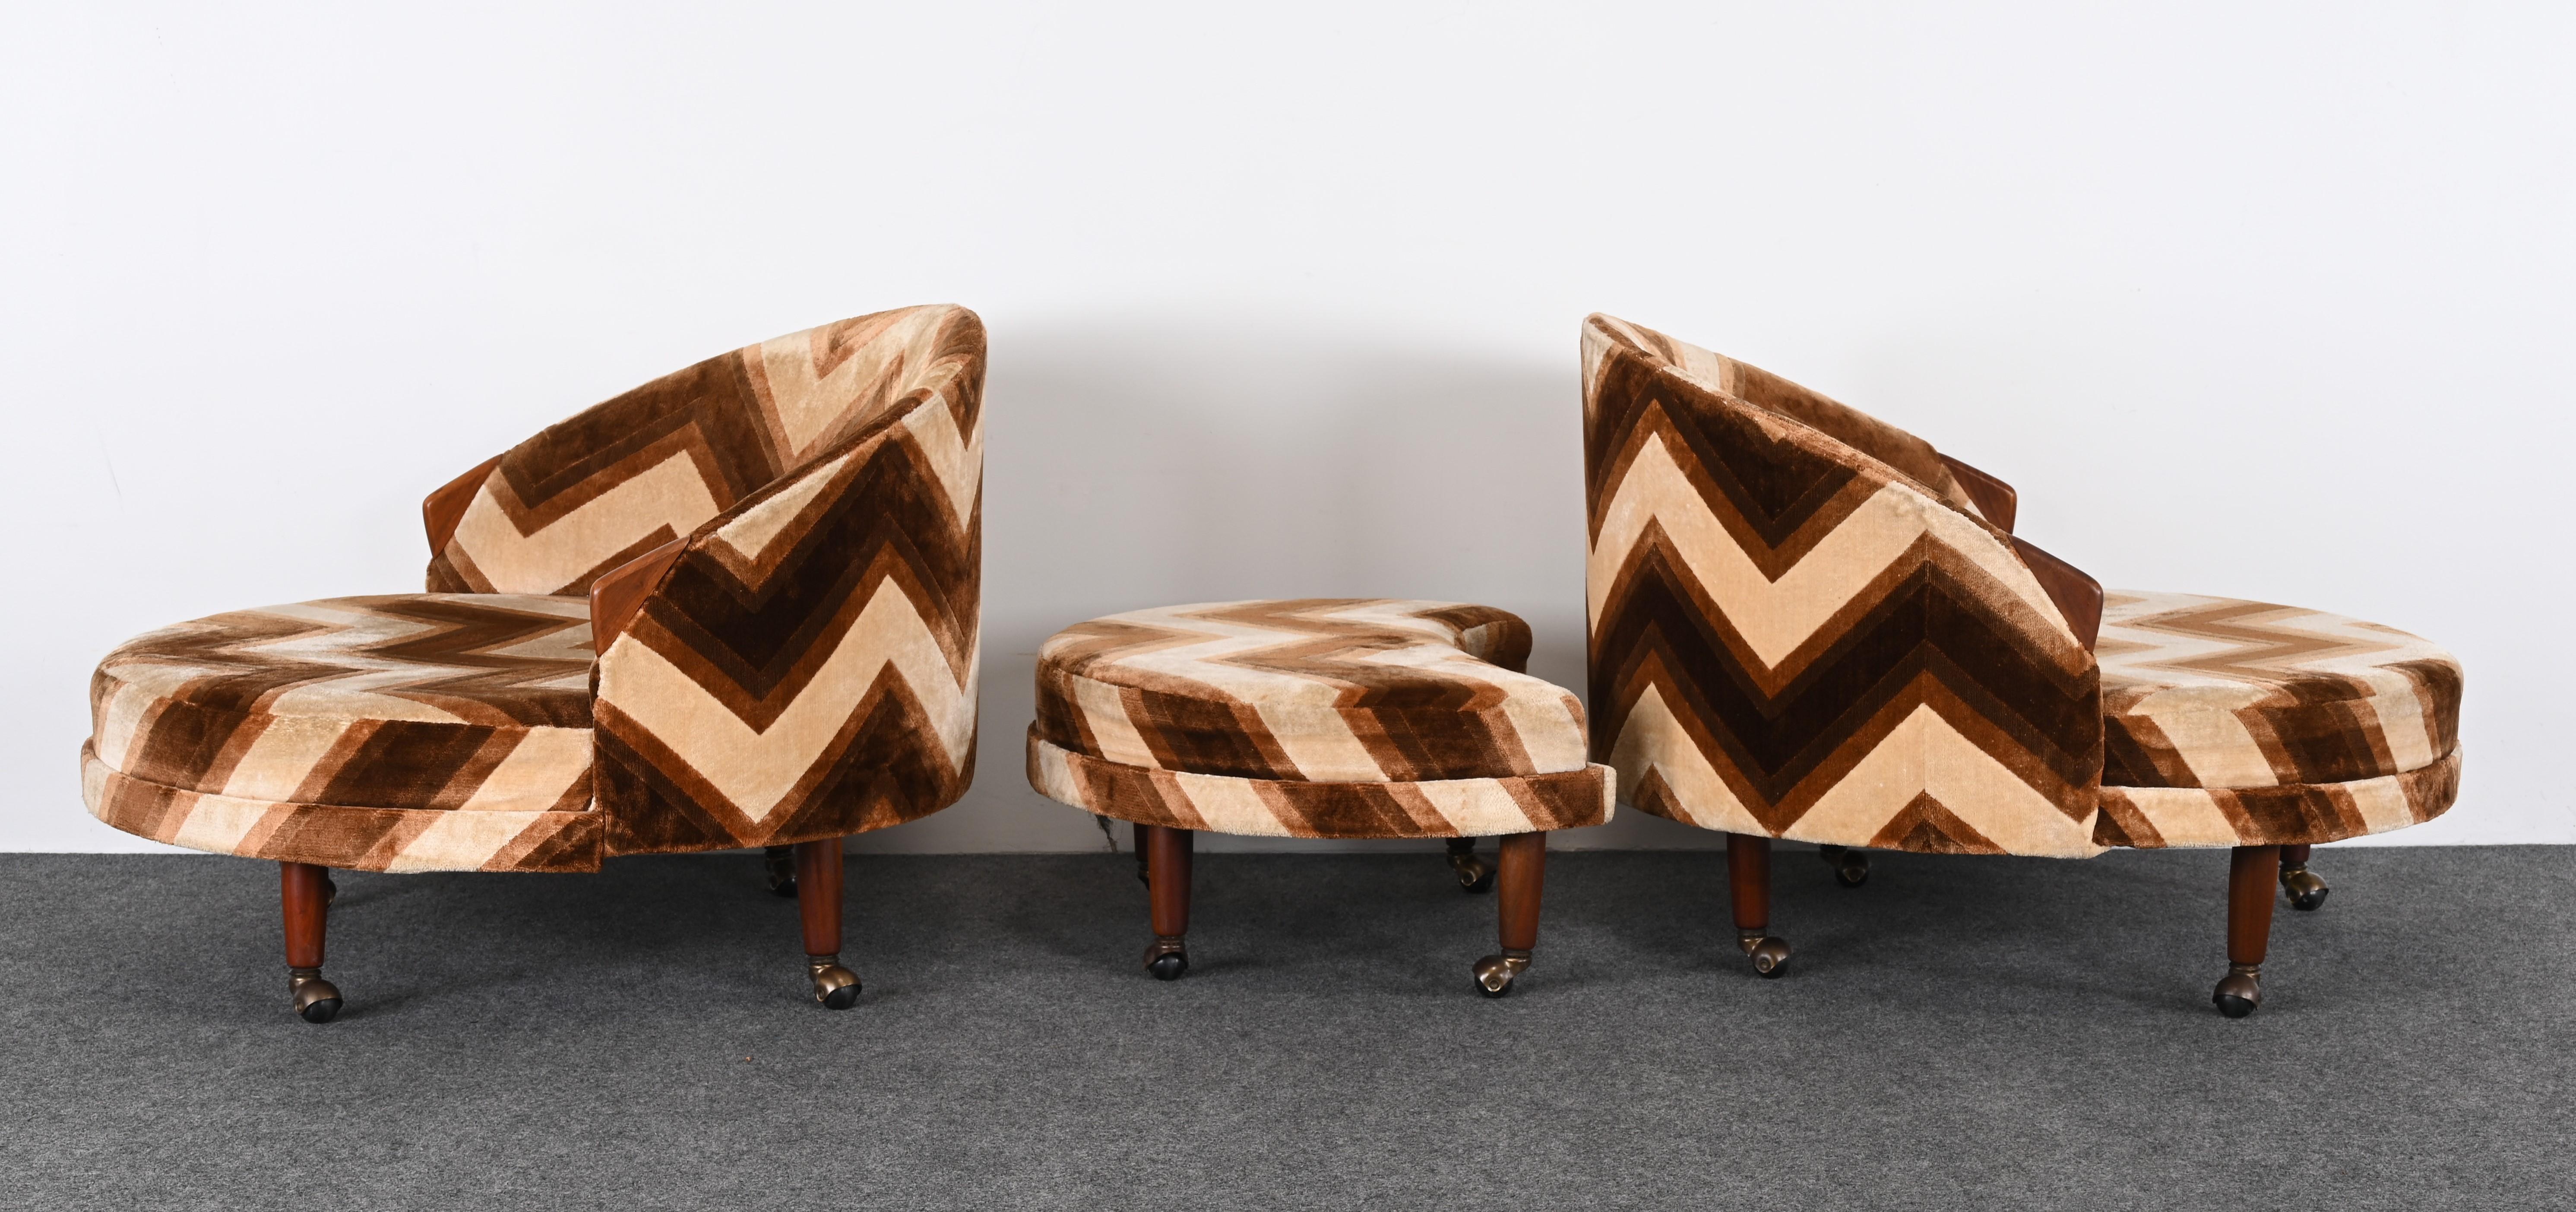 Pair of Adrian Pearsall Havana Lounge Chairs and Ottoman, 1965 For Sale 9